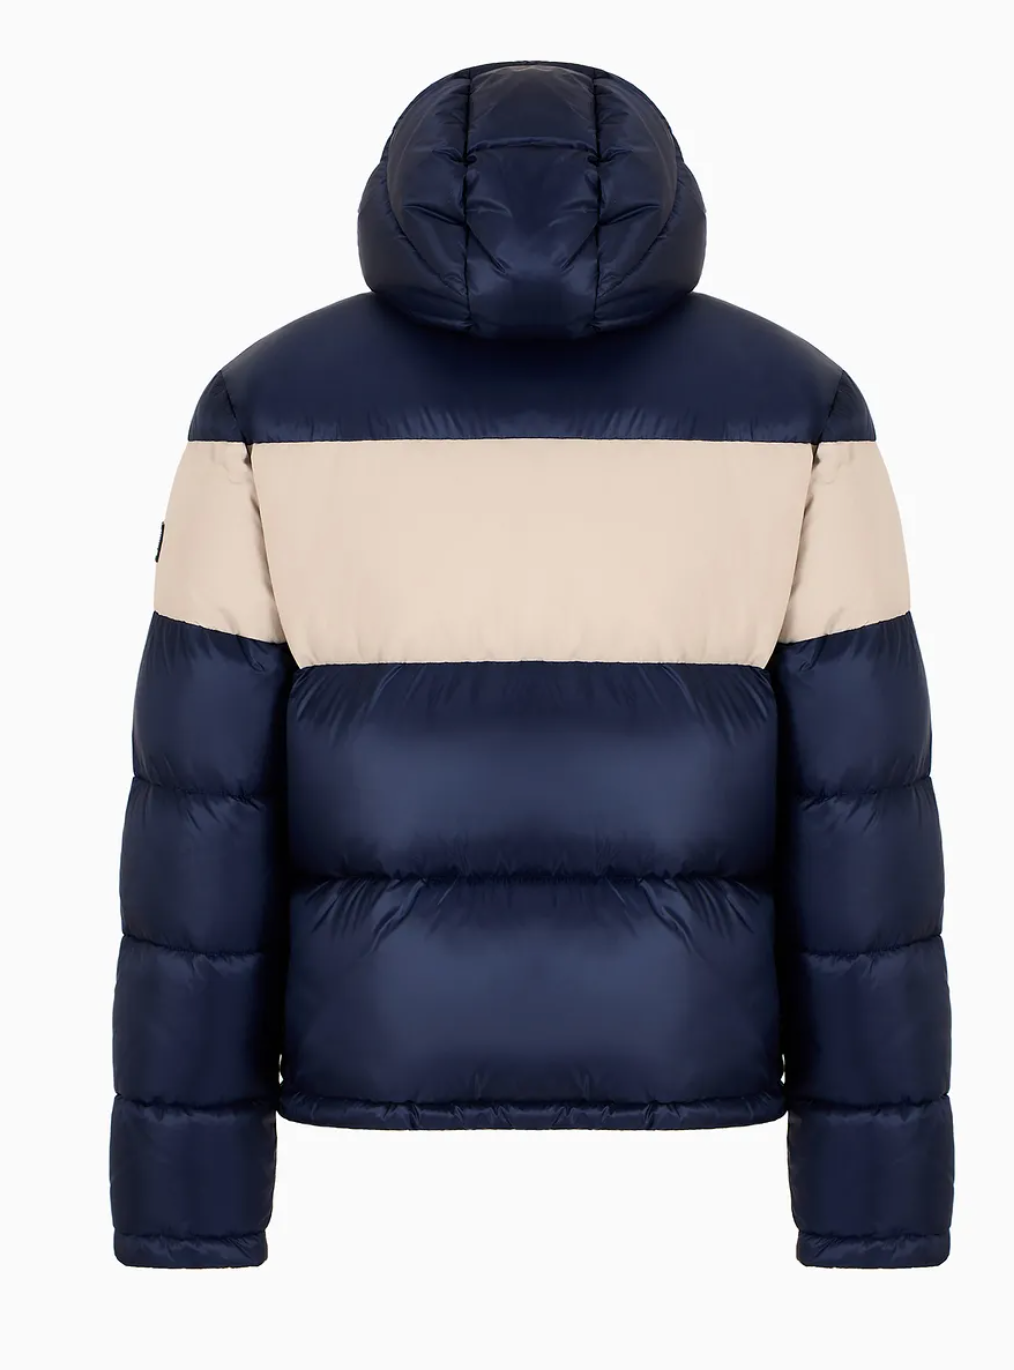 EA7 By Emporio Armani Hooded Quilt Jacket Navy